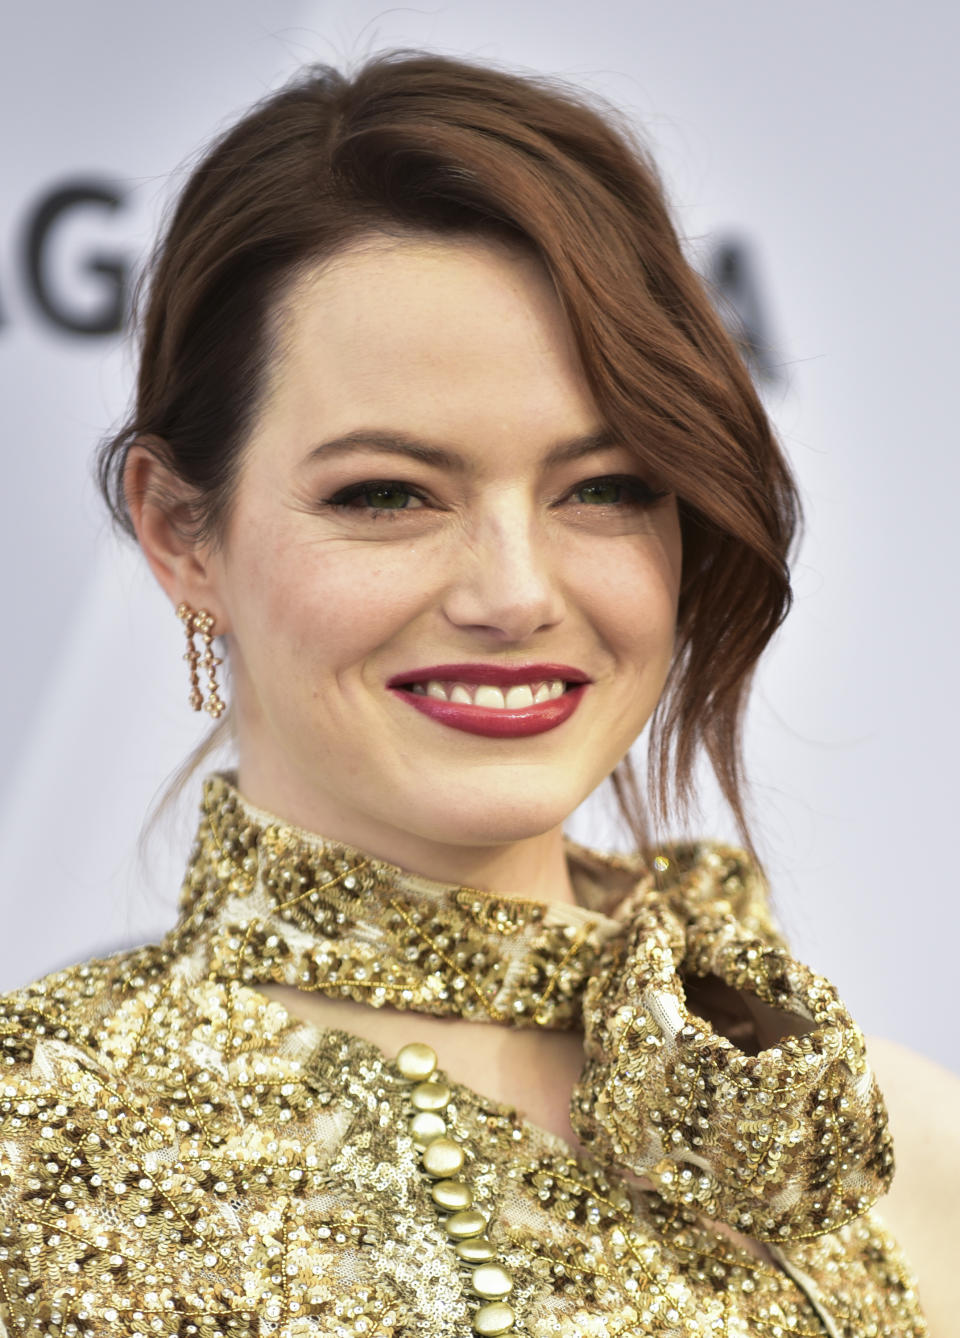 Emma Stone as a redhead is what red hair color dreams are made of. (Photo: Getty Images)